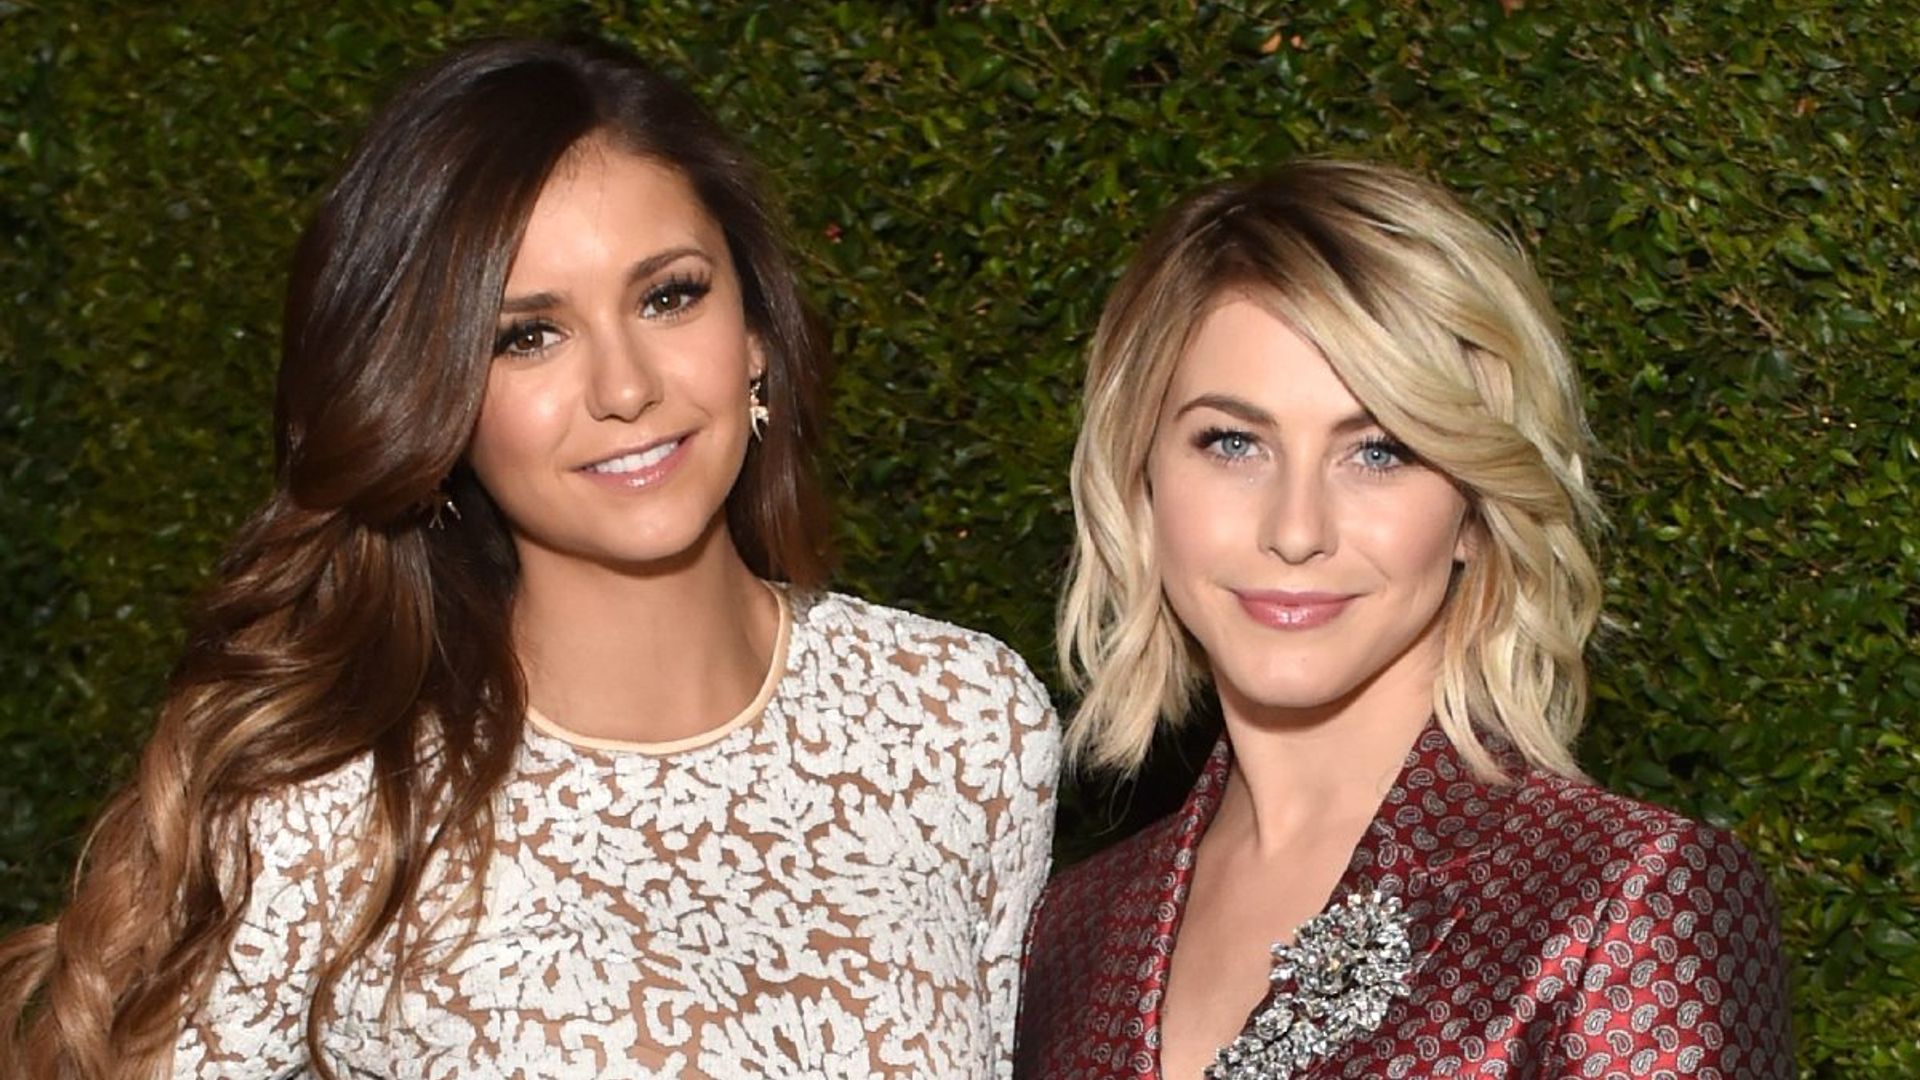 Julianne Hough resembles a goddess in ethereal photos with BFF Nina Dobrev